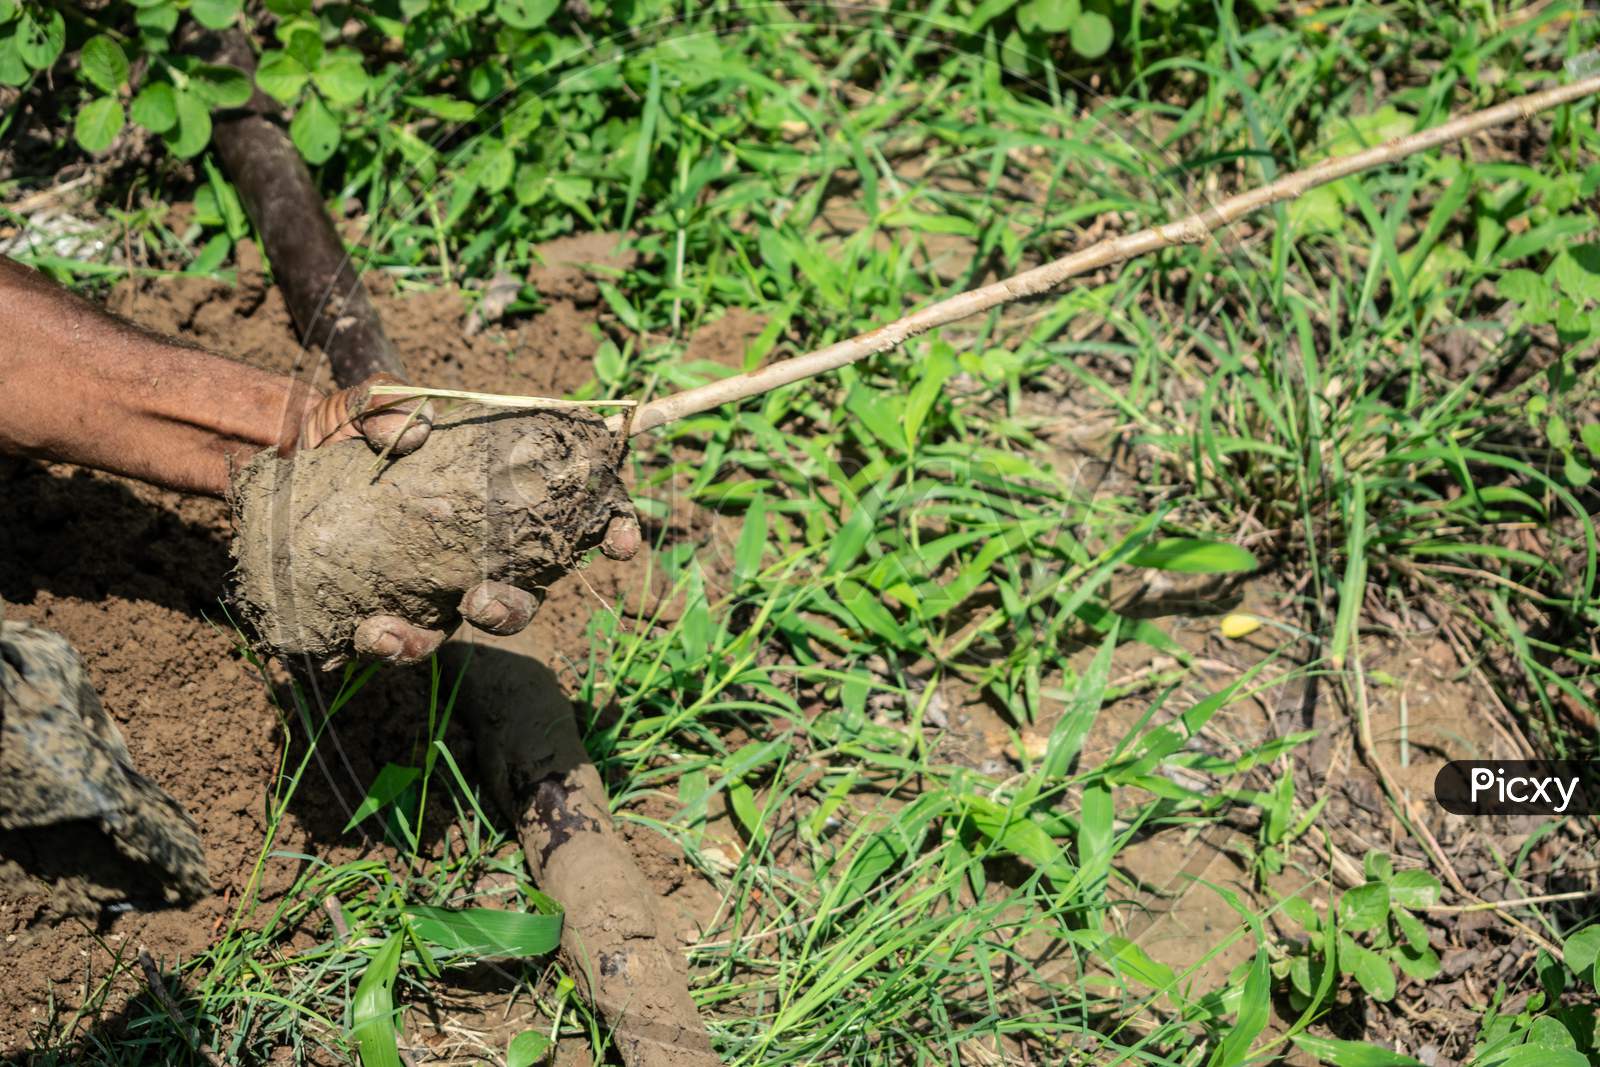 A man plants grafted guava trees at a farm using a digging tool